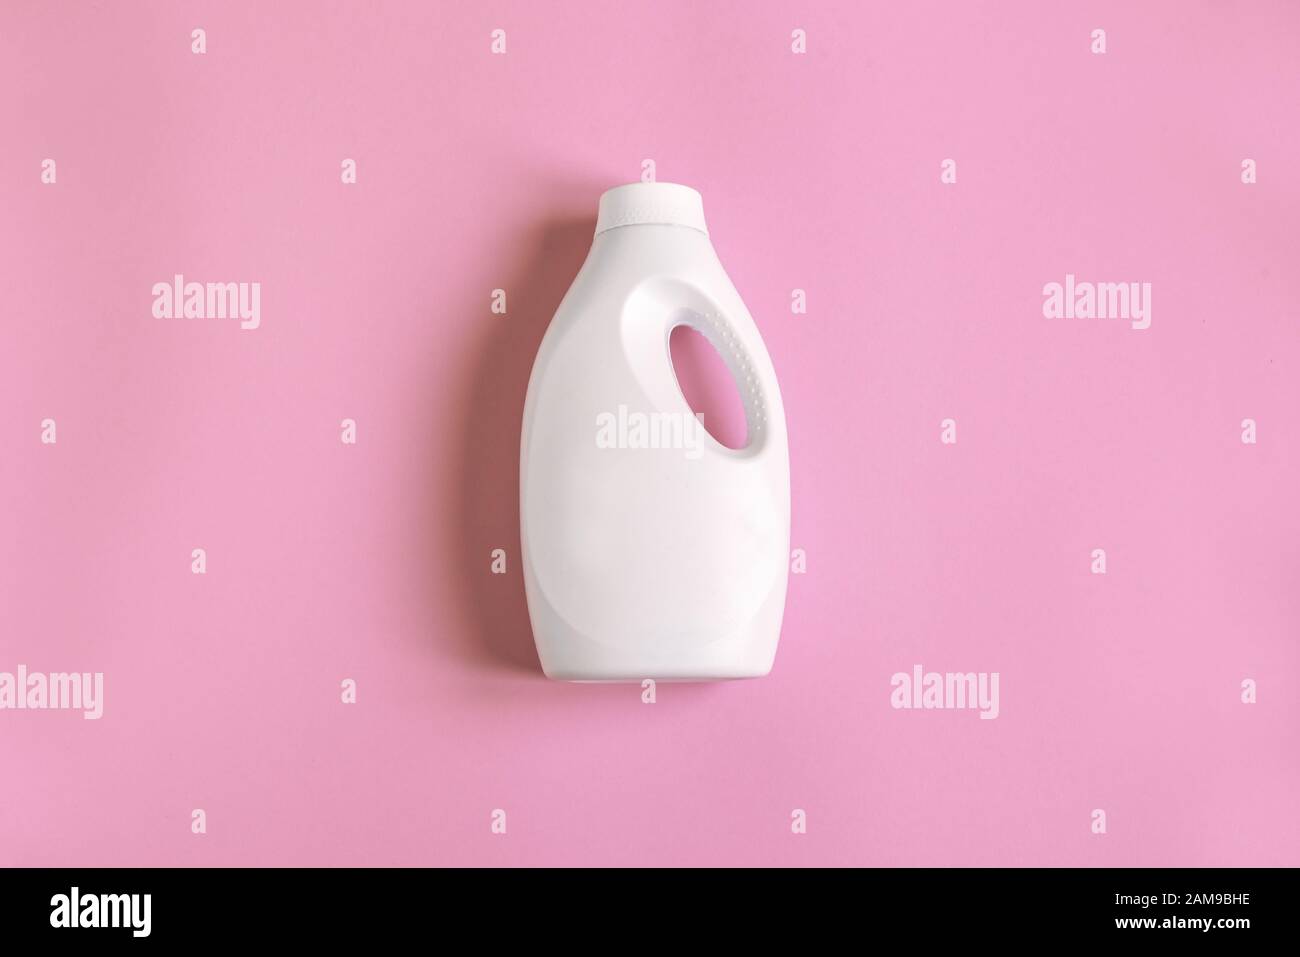 White plastic bottle of cleaning product, household chemicals or liquid laundry detergent on pink pastel background, flat lay, top view, copy space. Stock Photo